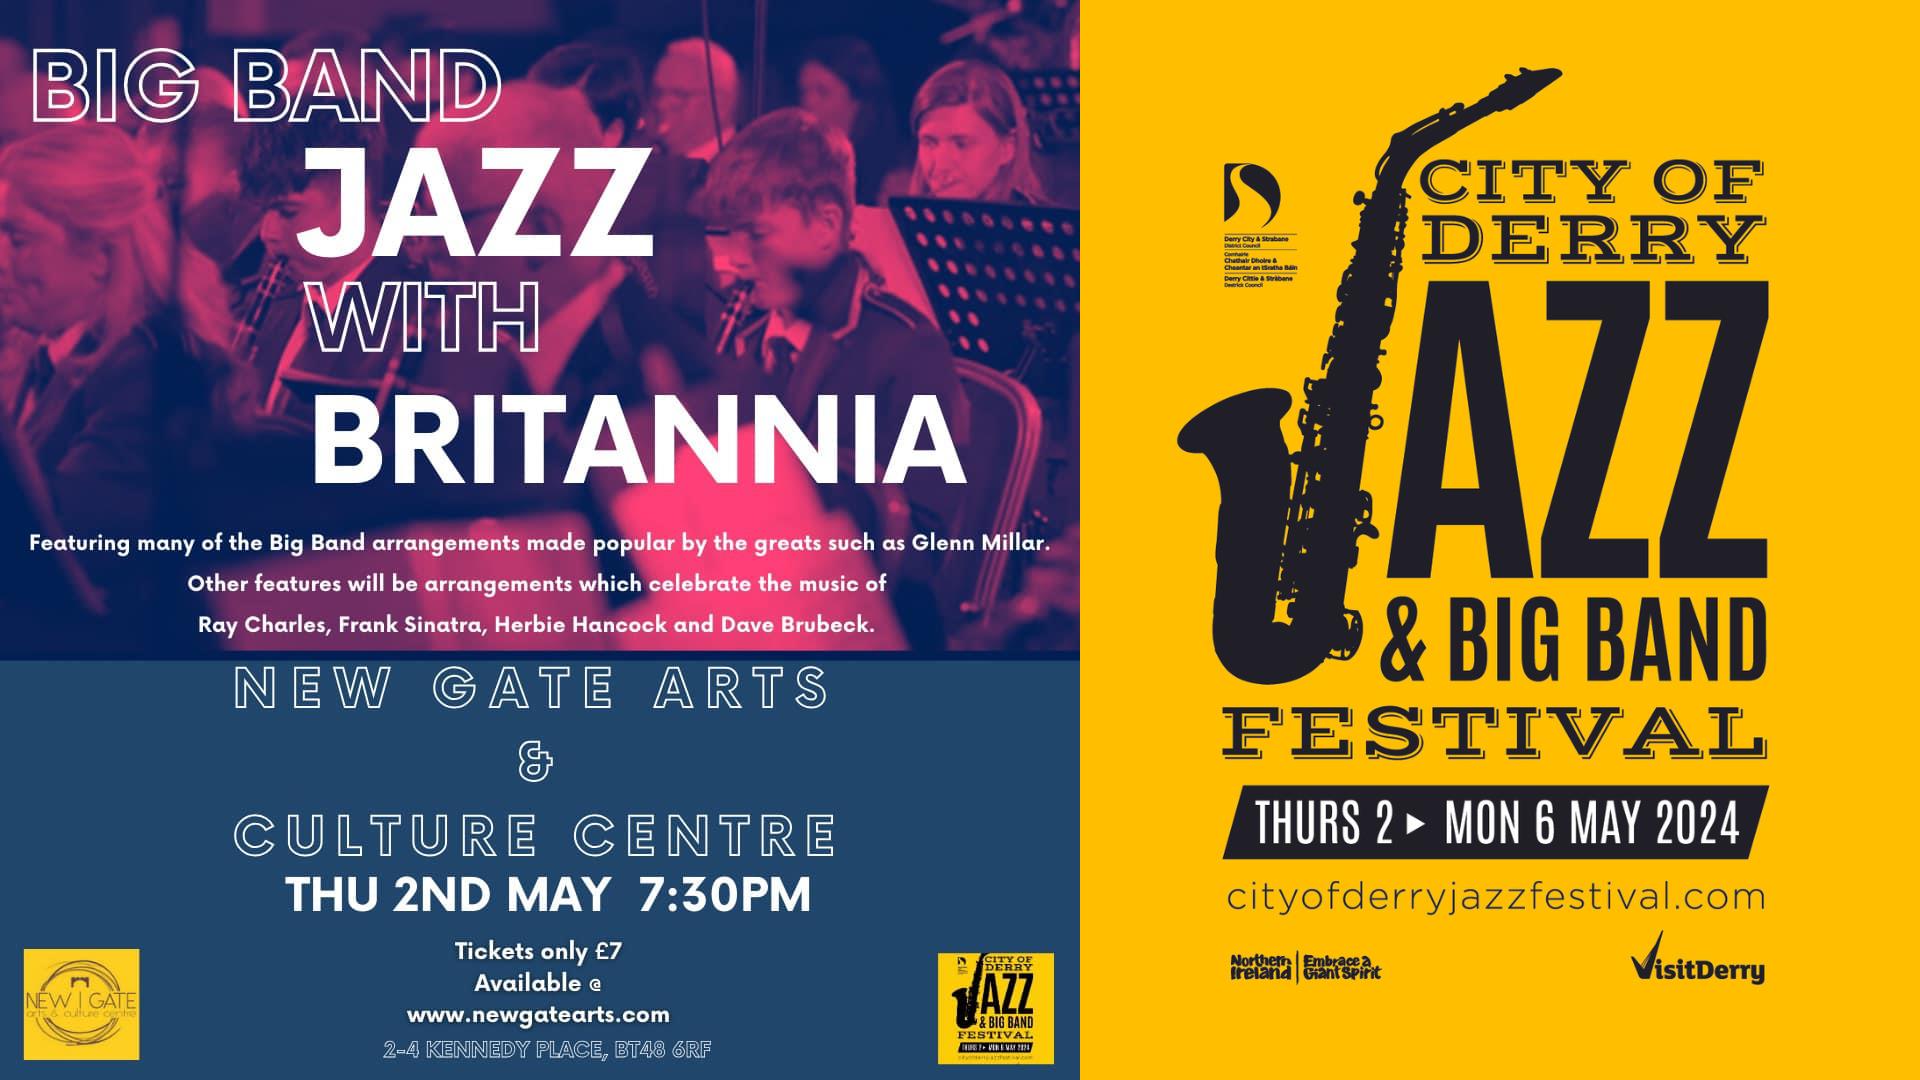 Big Band Jazz with Britannia at the New Gate Arts & Culture Centre